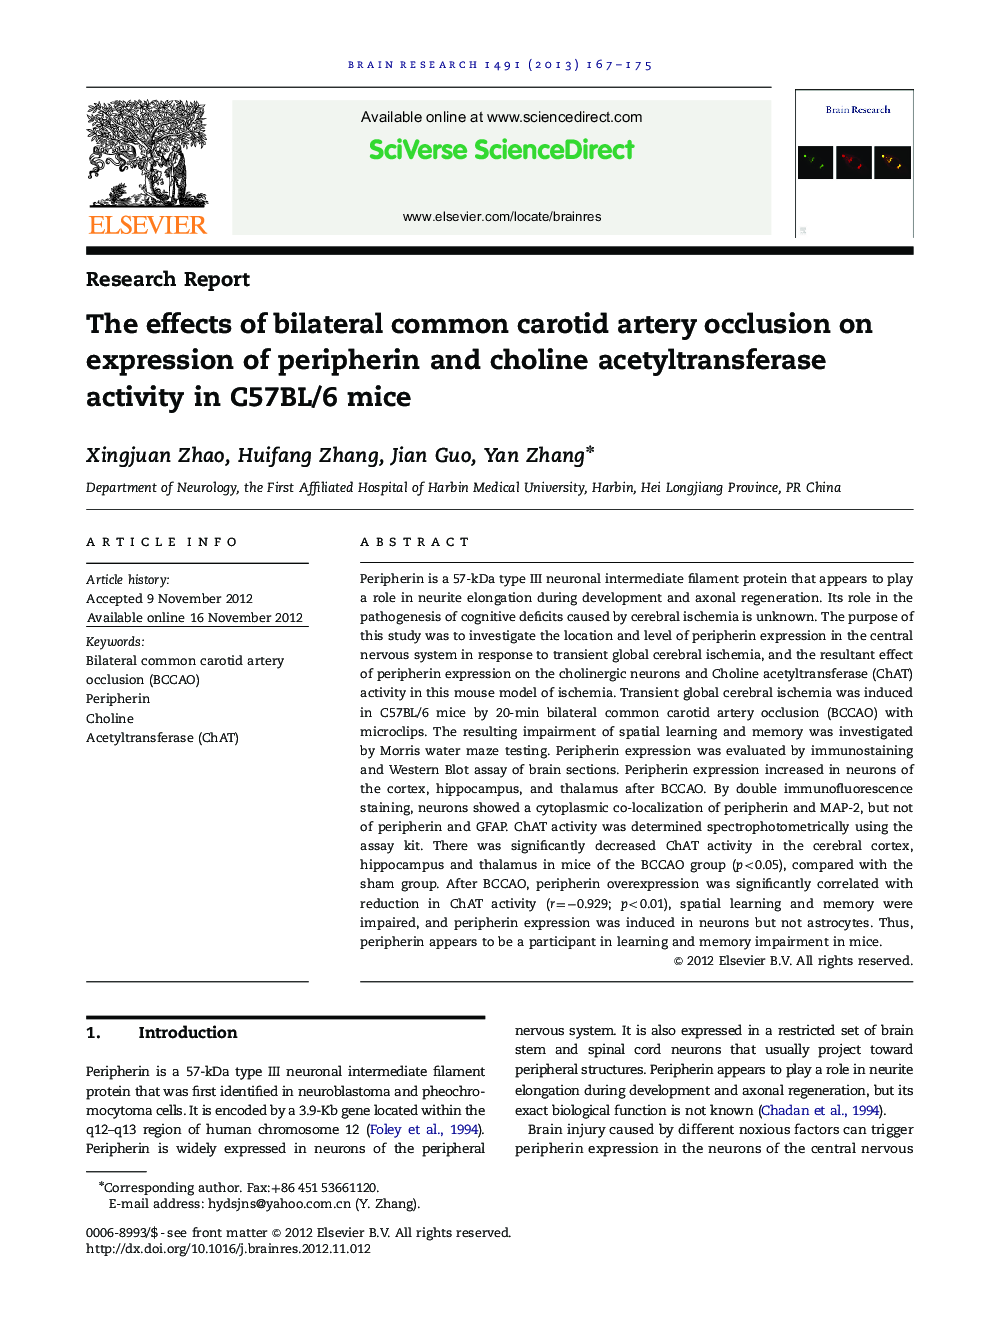 Research ReportThe effects of bilateral common carotid artery occlusion on expression of peripherin and choline acetyltransferase activity in C57BL/6 mice